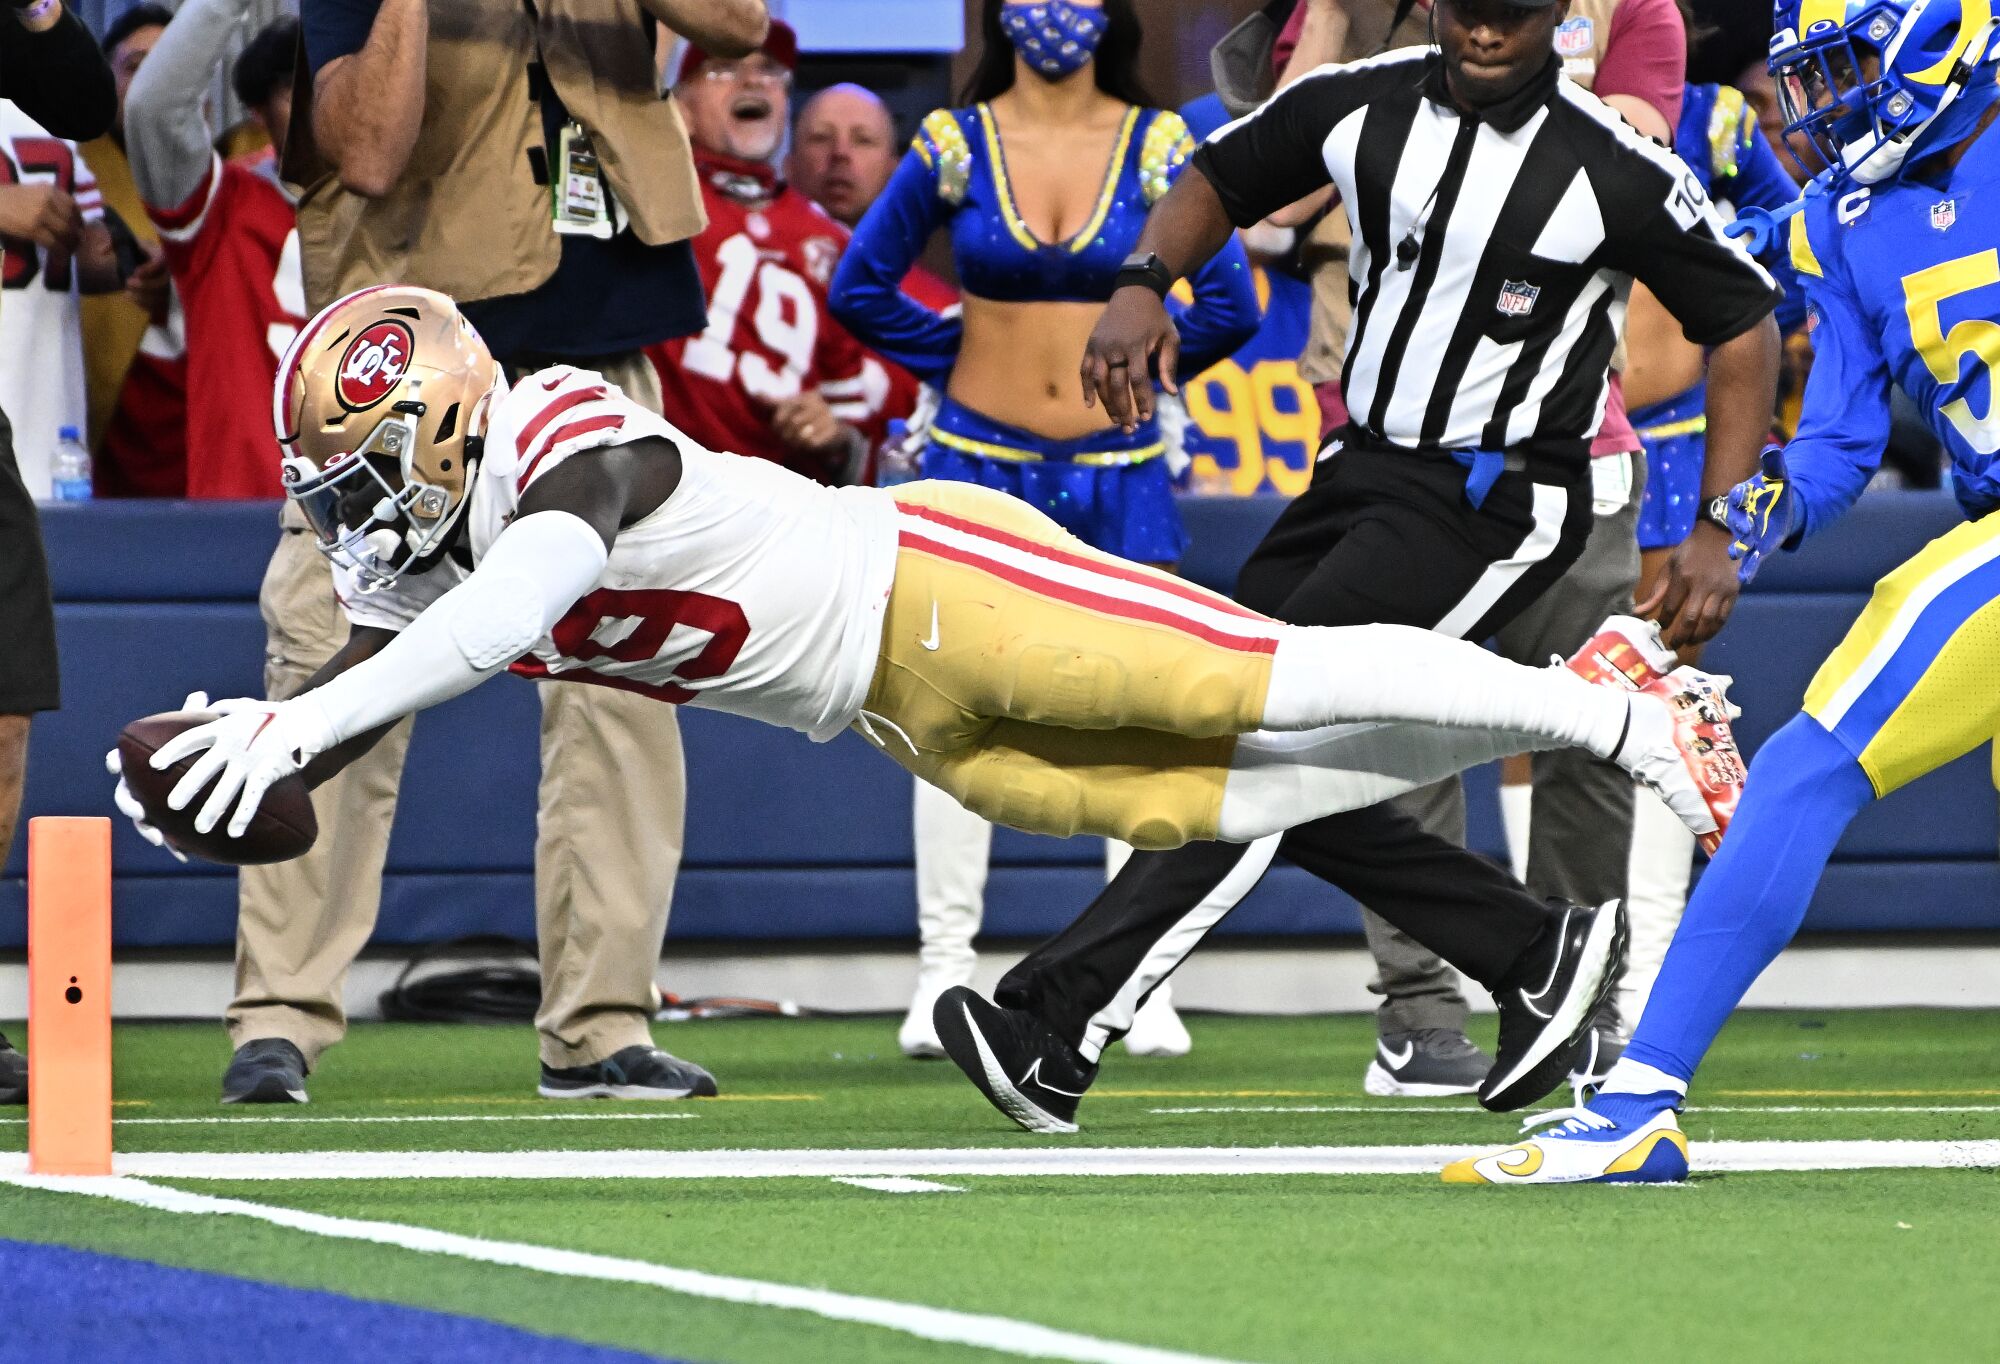 San Francisco 49ers wide receiver Deebo Samuel dives for the end zone to beat Rams cornerback Jalen Ramsey.